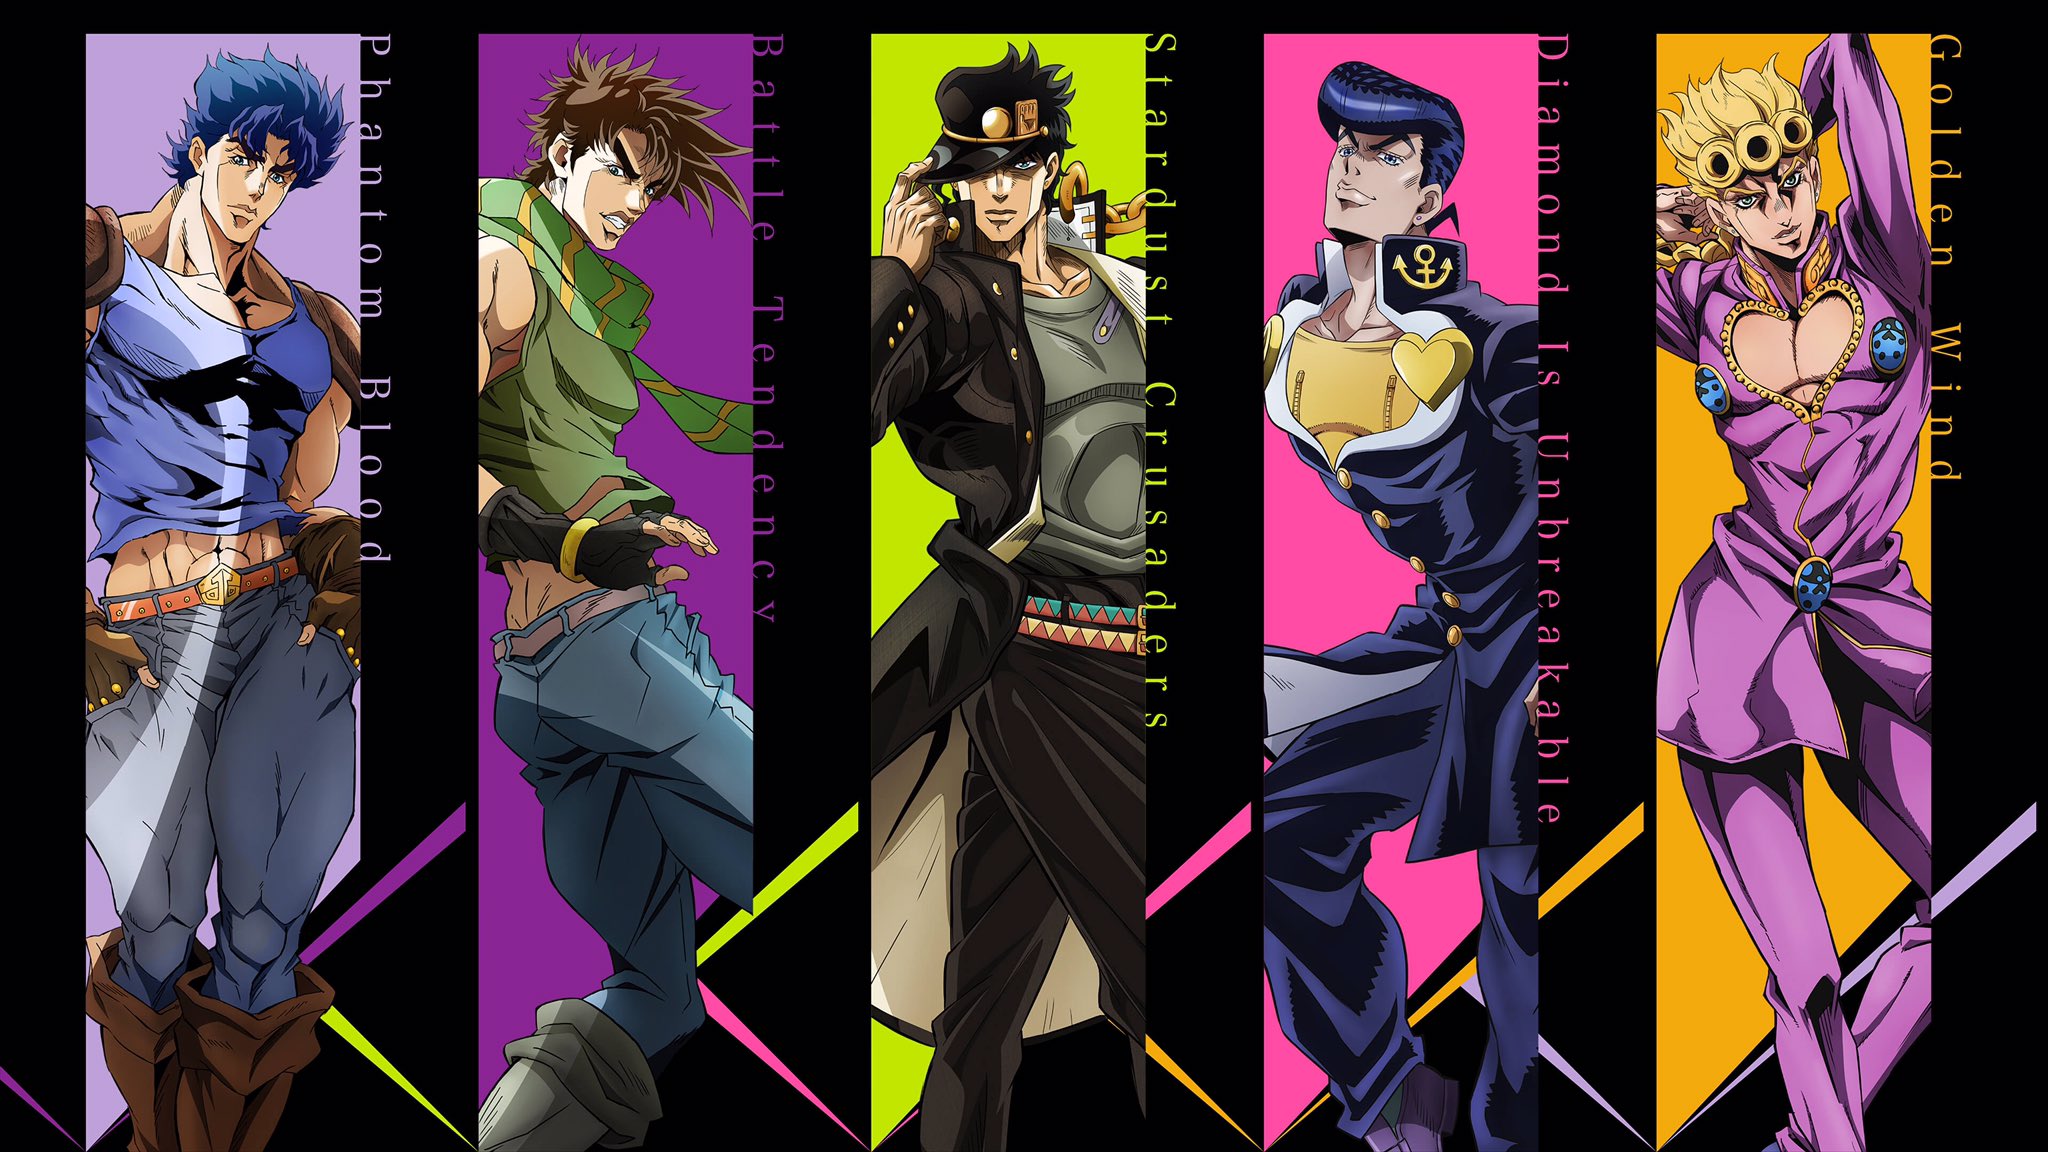 Animetv チェーン Jojo S Bizarre Adventure Special Event Joestar The Inherited Soul Start Now The Event Is Accessible With The Purchase Of A Ticket Link T Co Jvzey2d1al T Co Dhknfqenmy